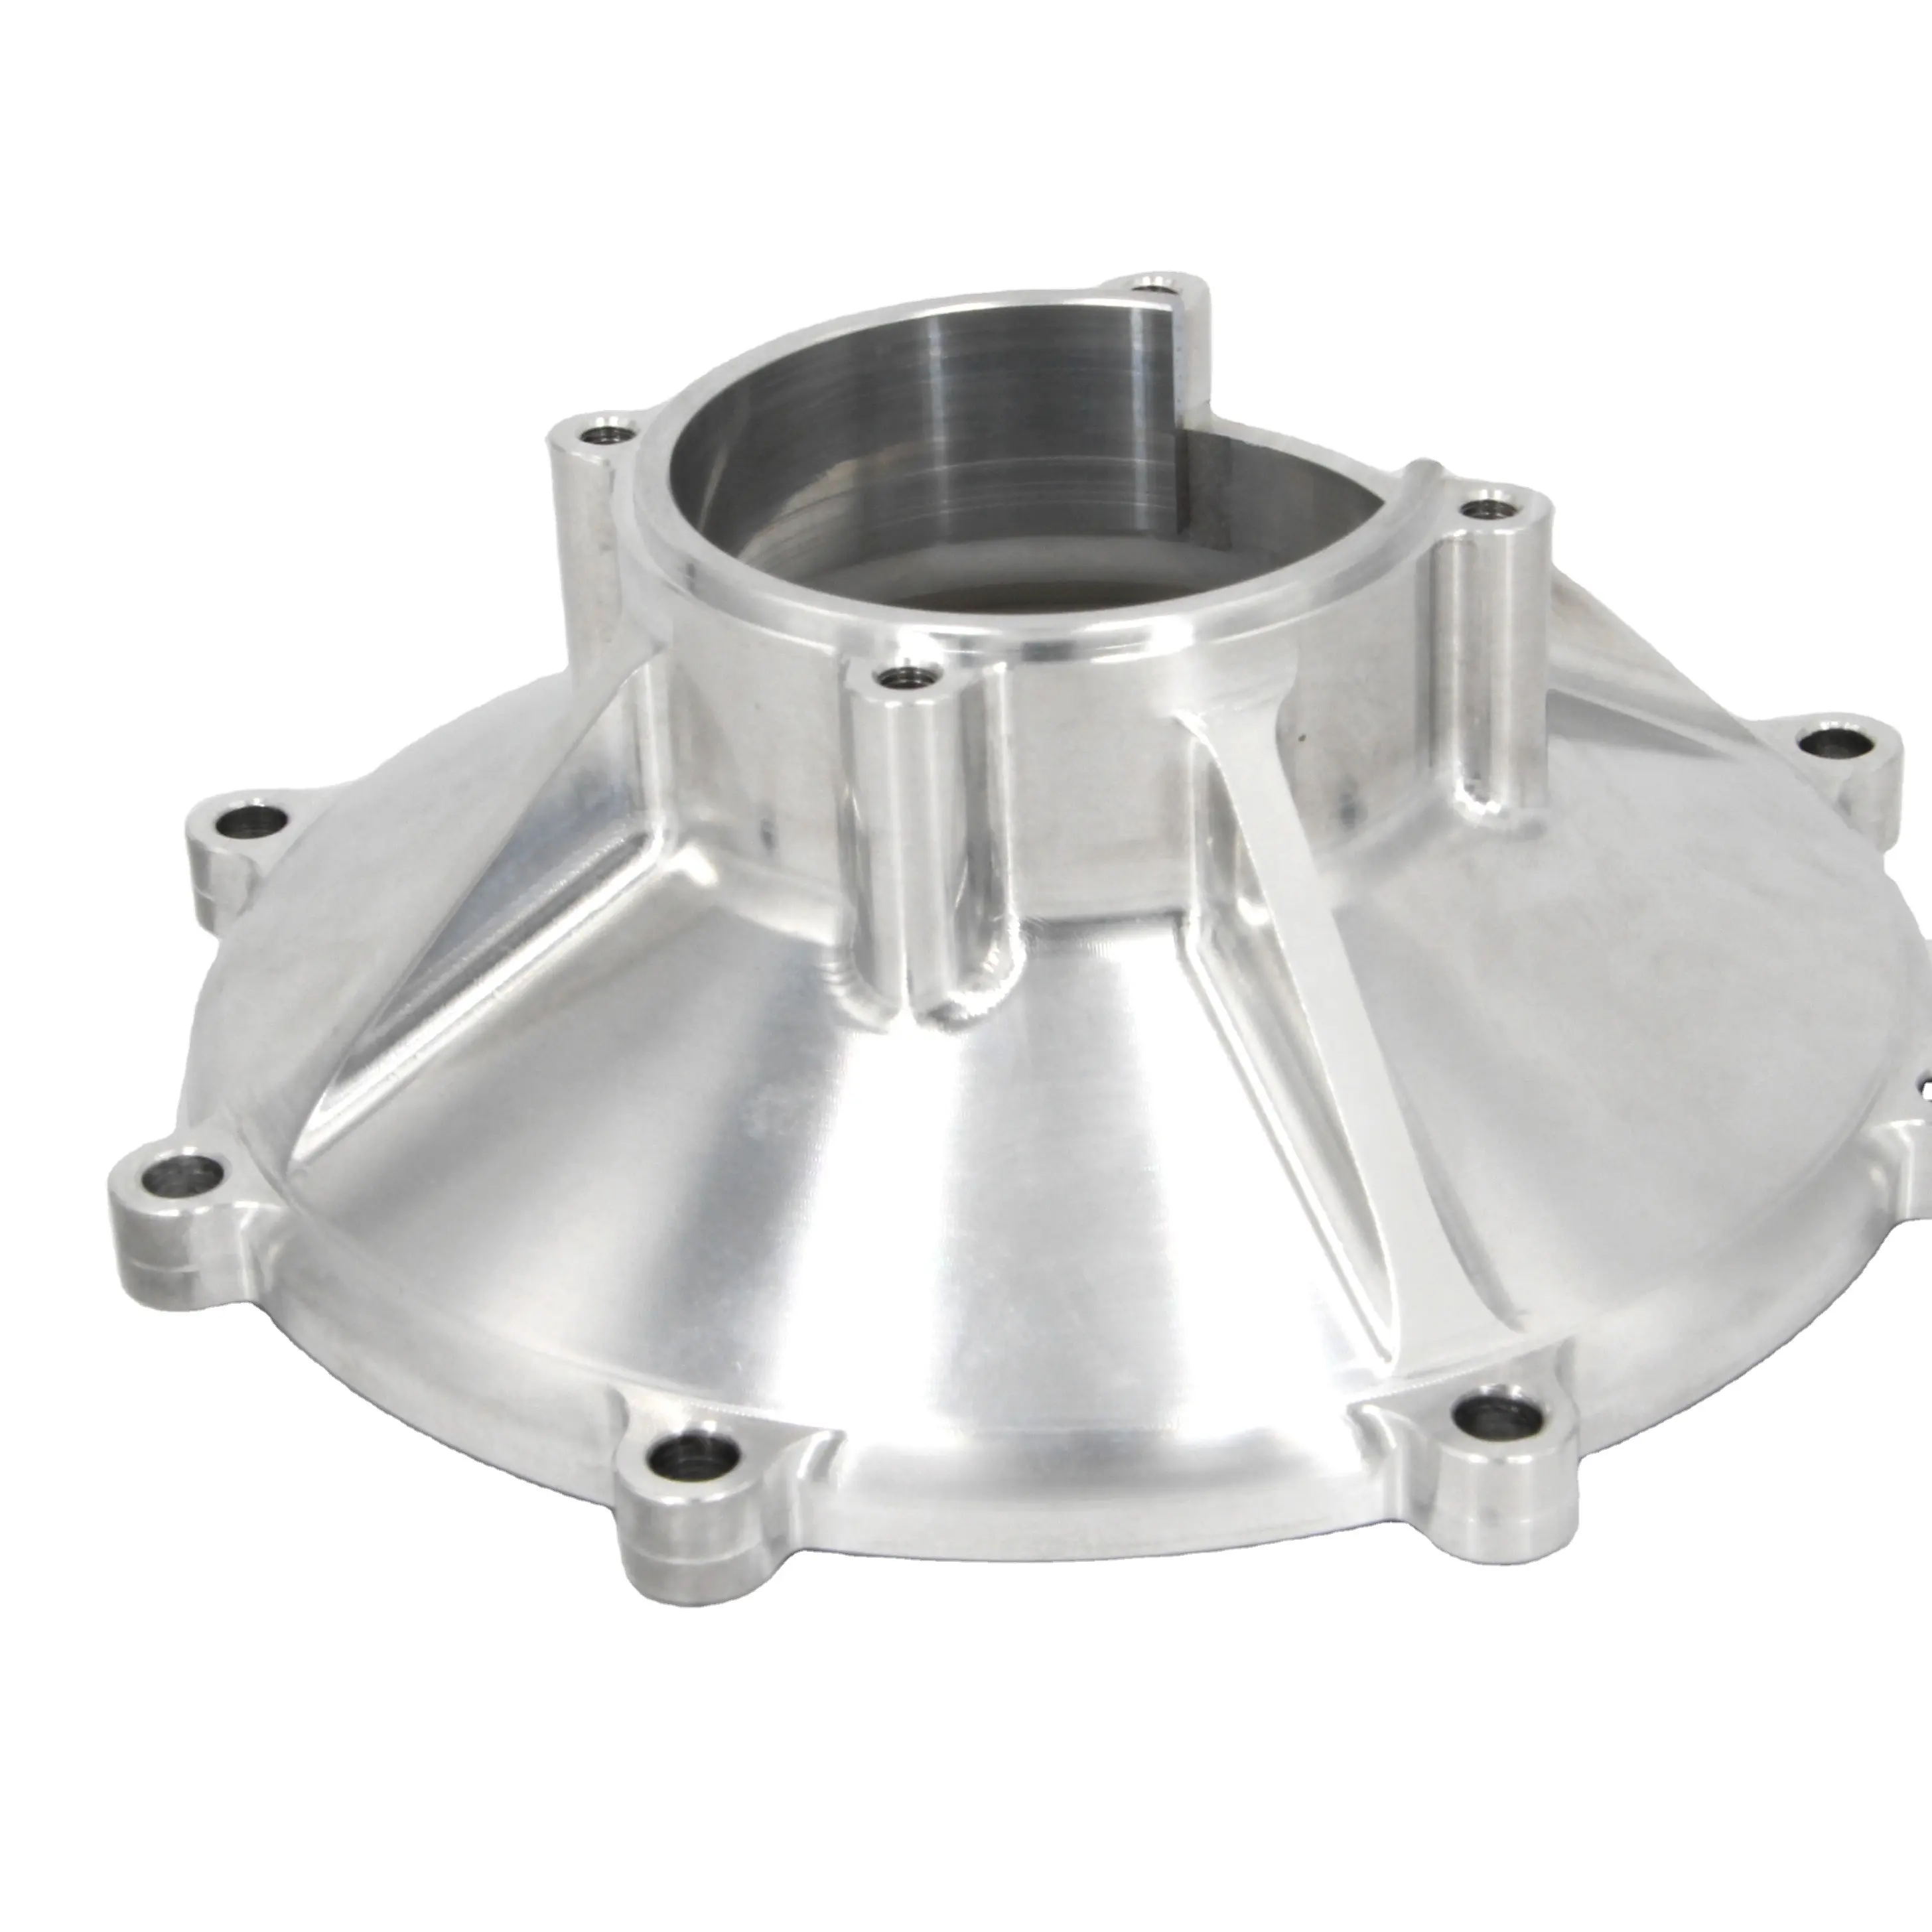 Stainless steel carbon steel precision CNC engine custom parts are widely used in aircraft engines